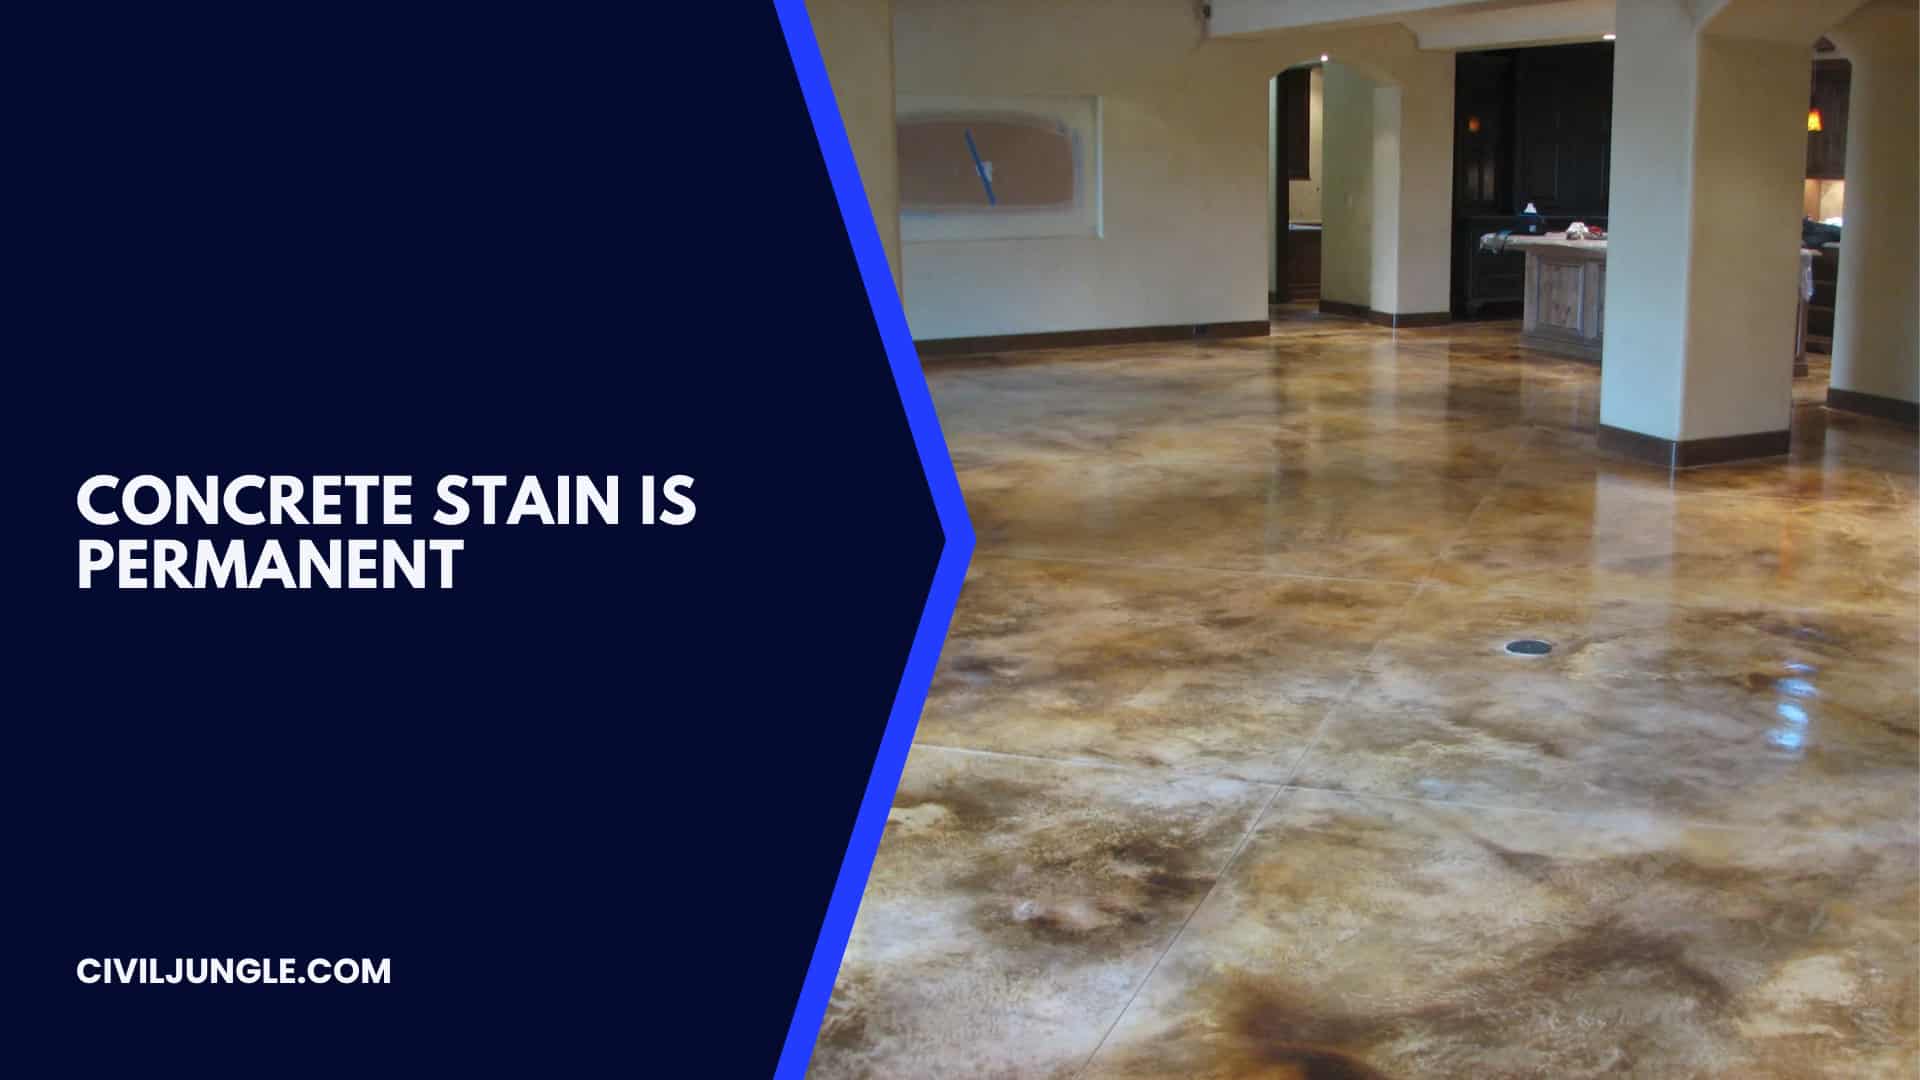 Can Your Old Concrete Be Stained?